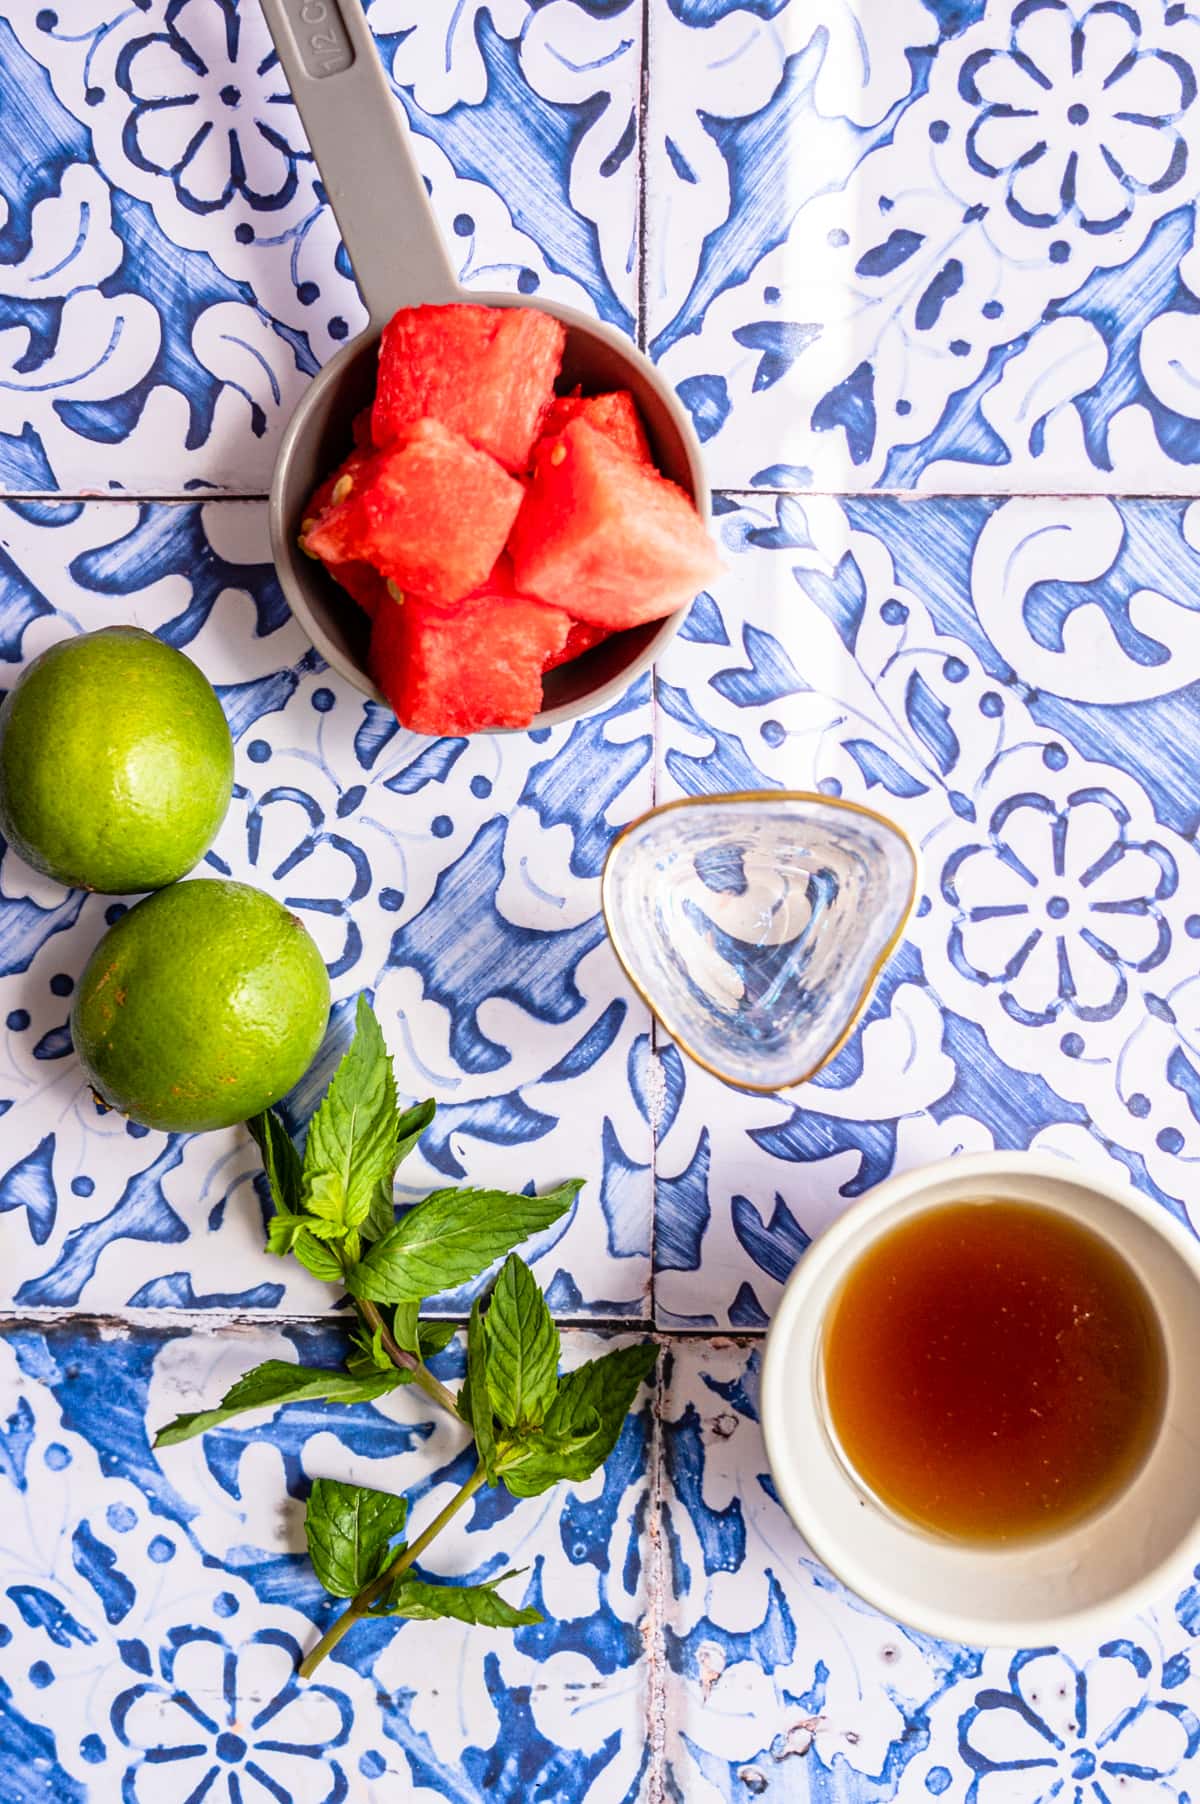 A shot glass with vodka, cubed watermelon, limes,  mint and agave on a blue tile table.